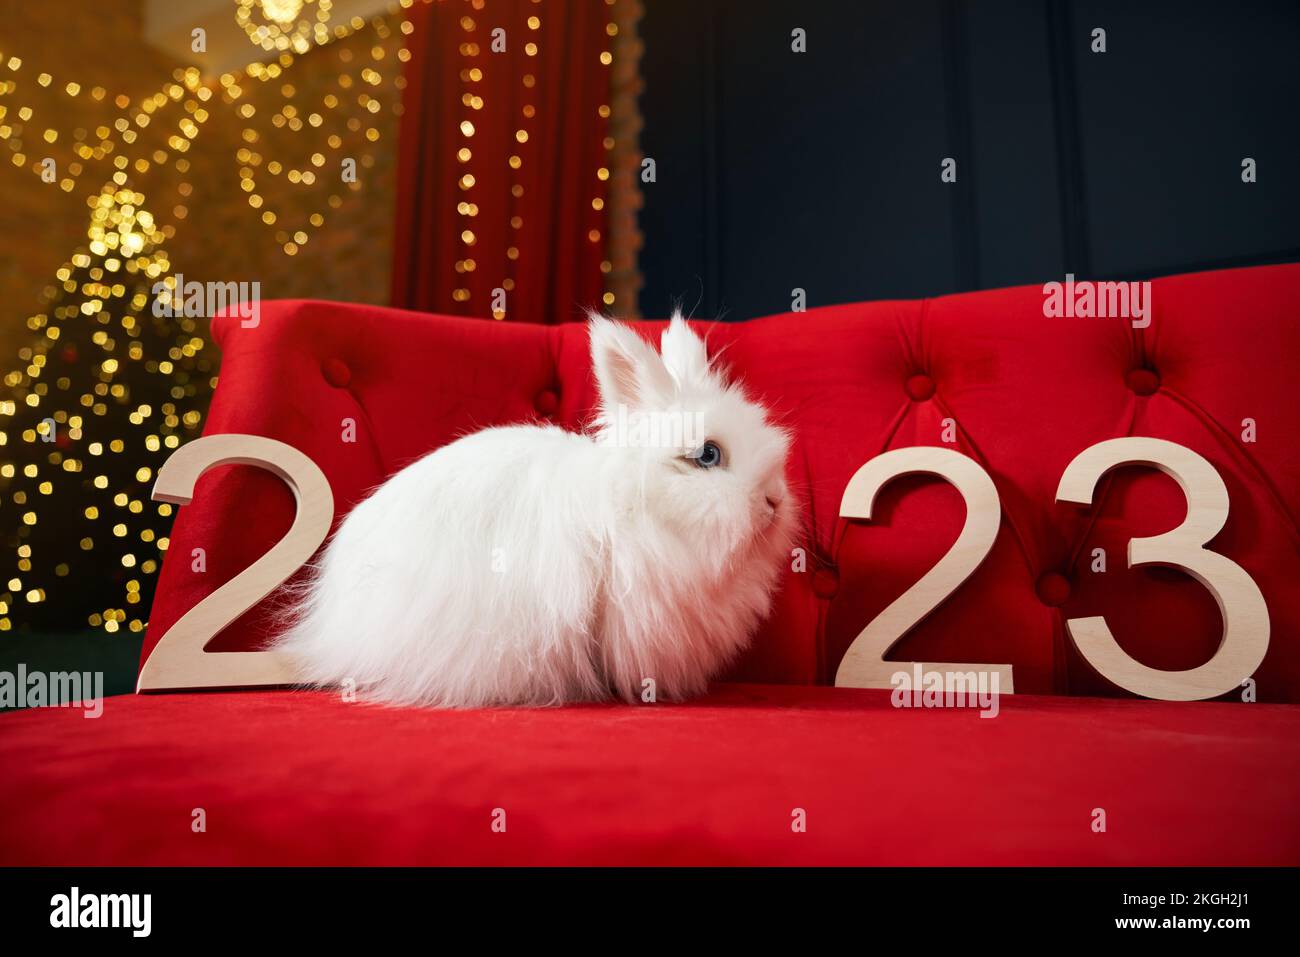 Side view of animal, symbol of new year 2023 posing indoors. Cute, furry, white rabbit sitting on red sofa in room decorated with garlands. Concept of Stock Photo